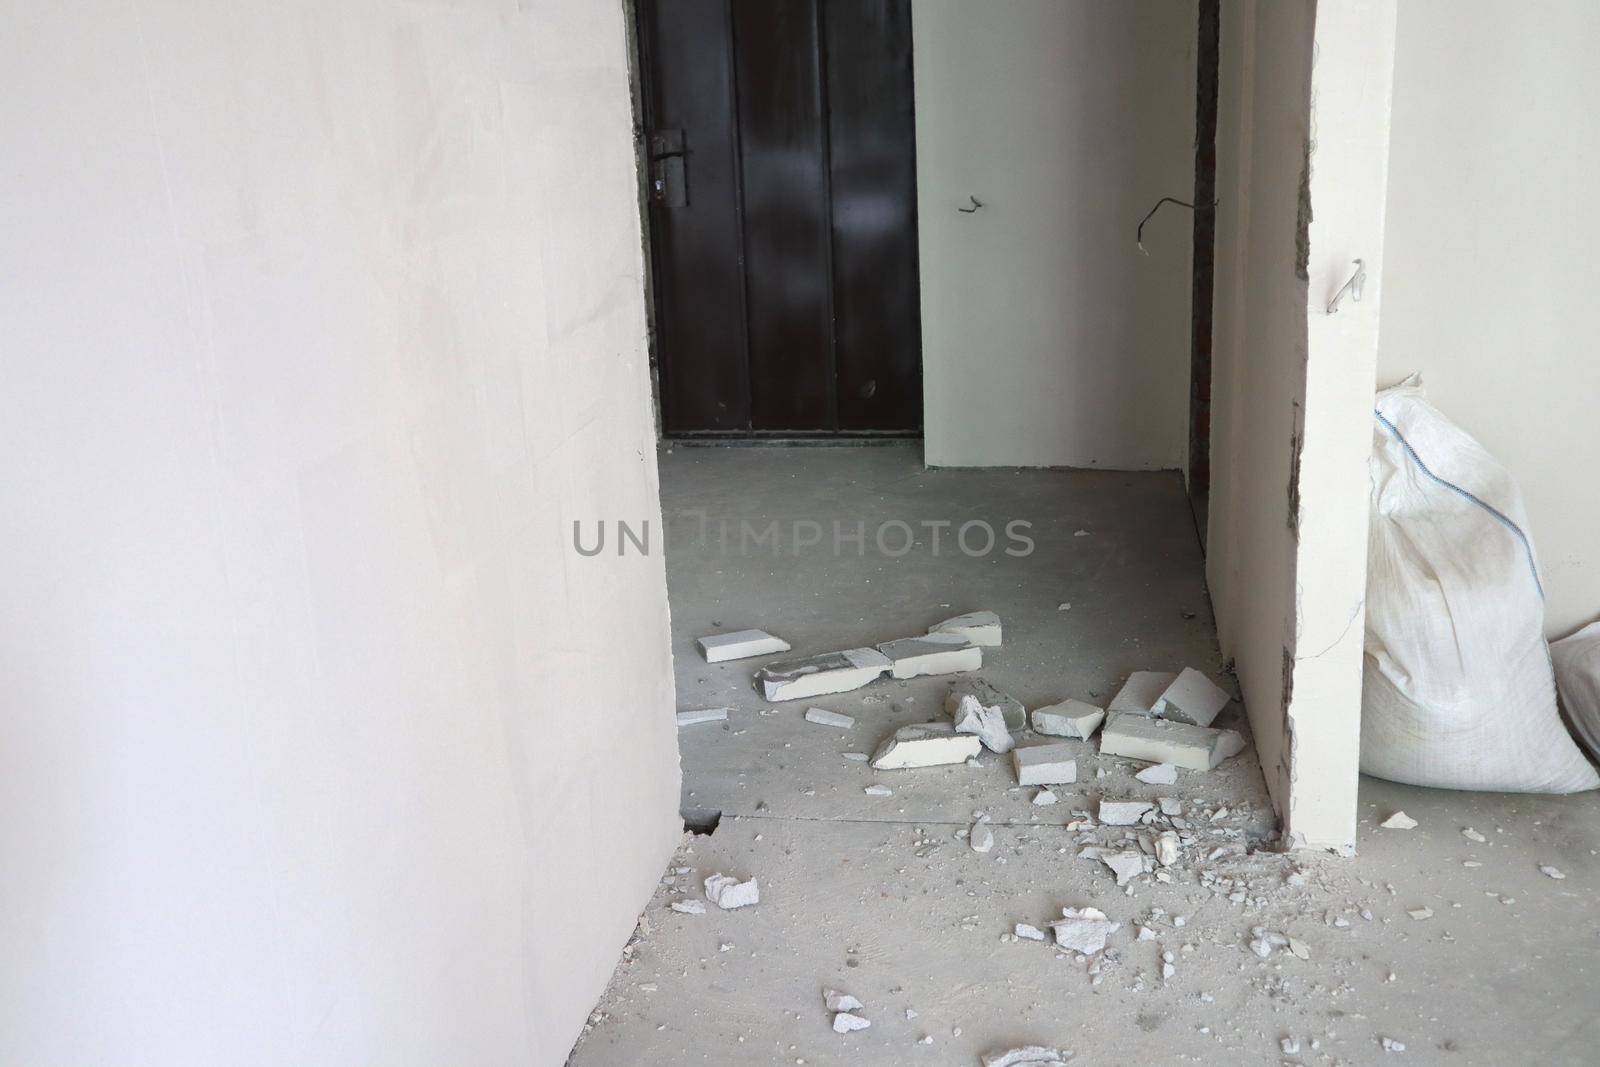 Remains of construction debris in the apartment by SemFid